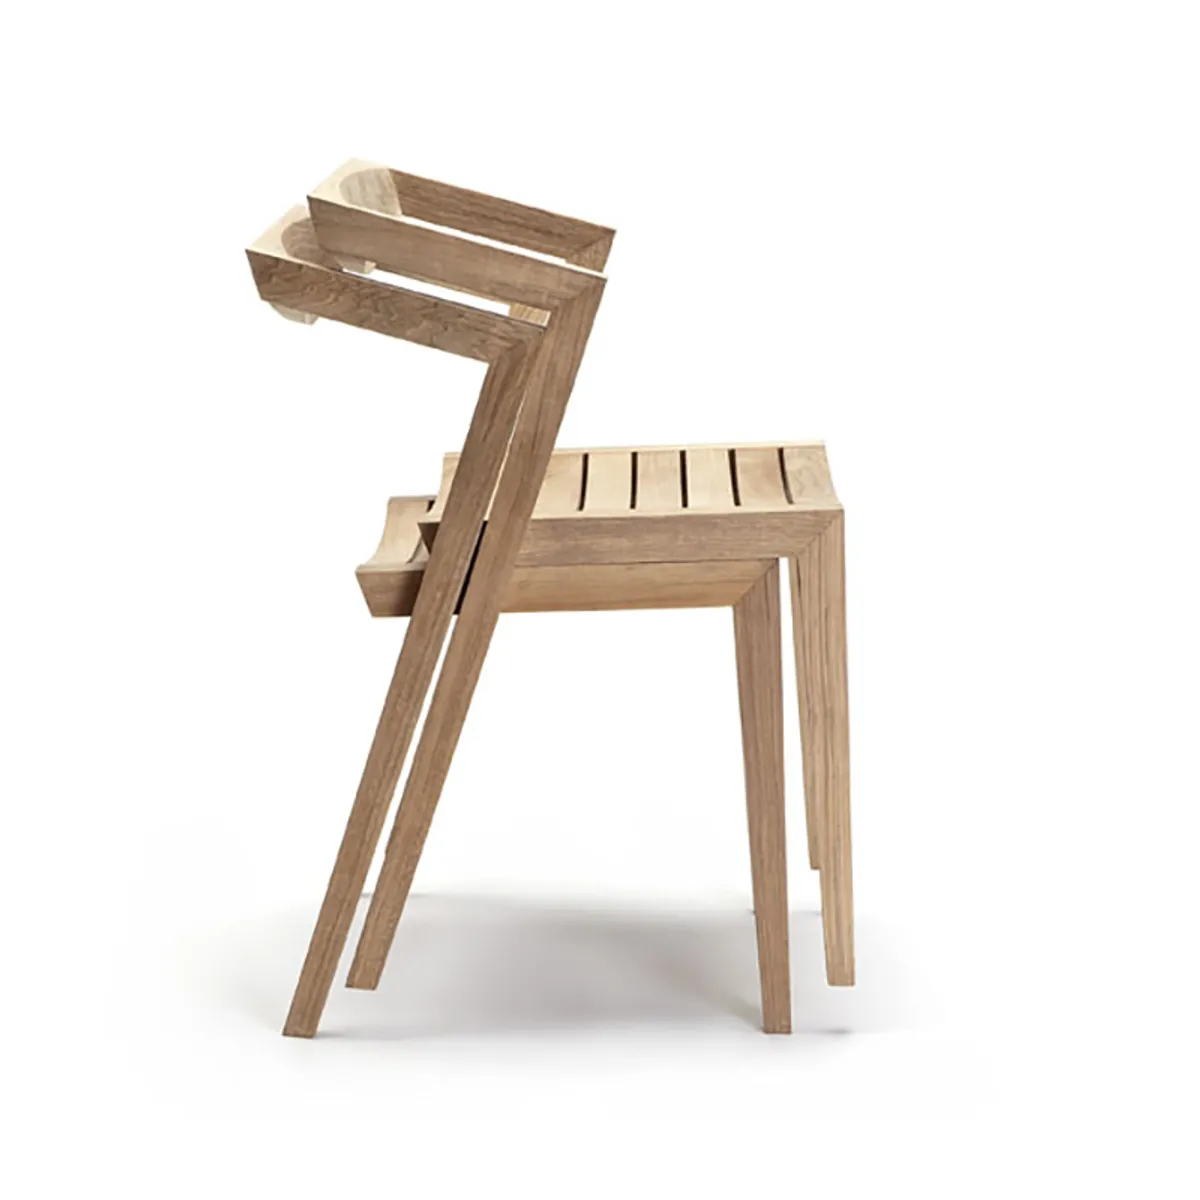 Borough Side Chair Stacking Outdoor Furniture In Teak Wood 079